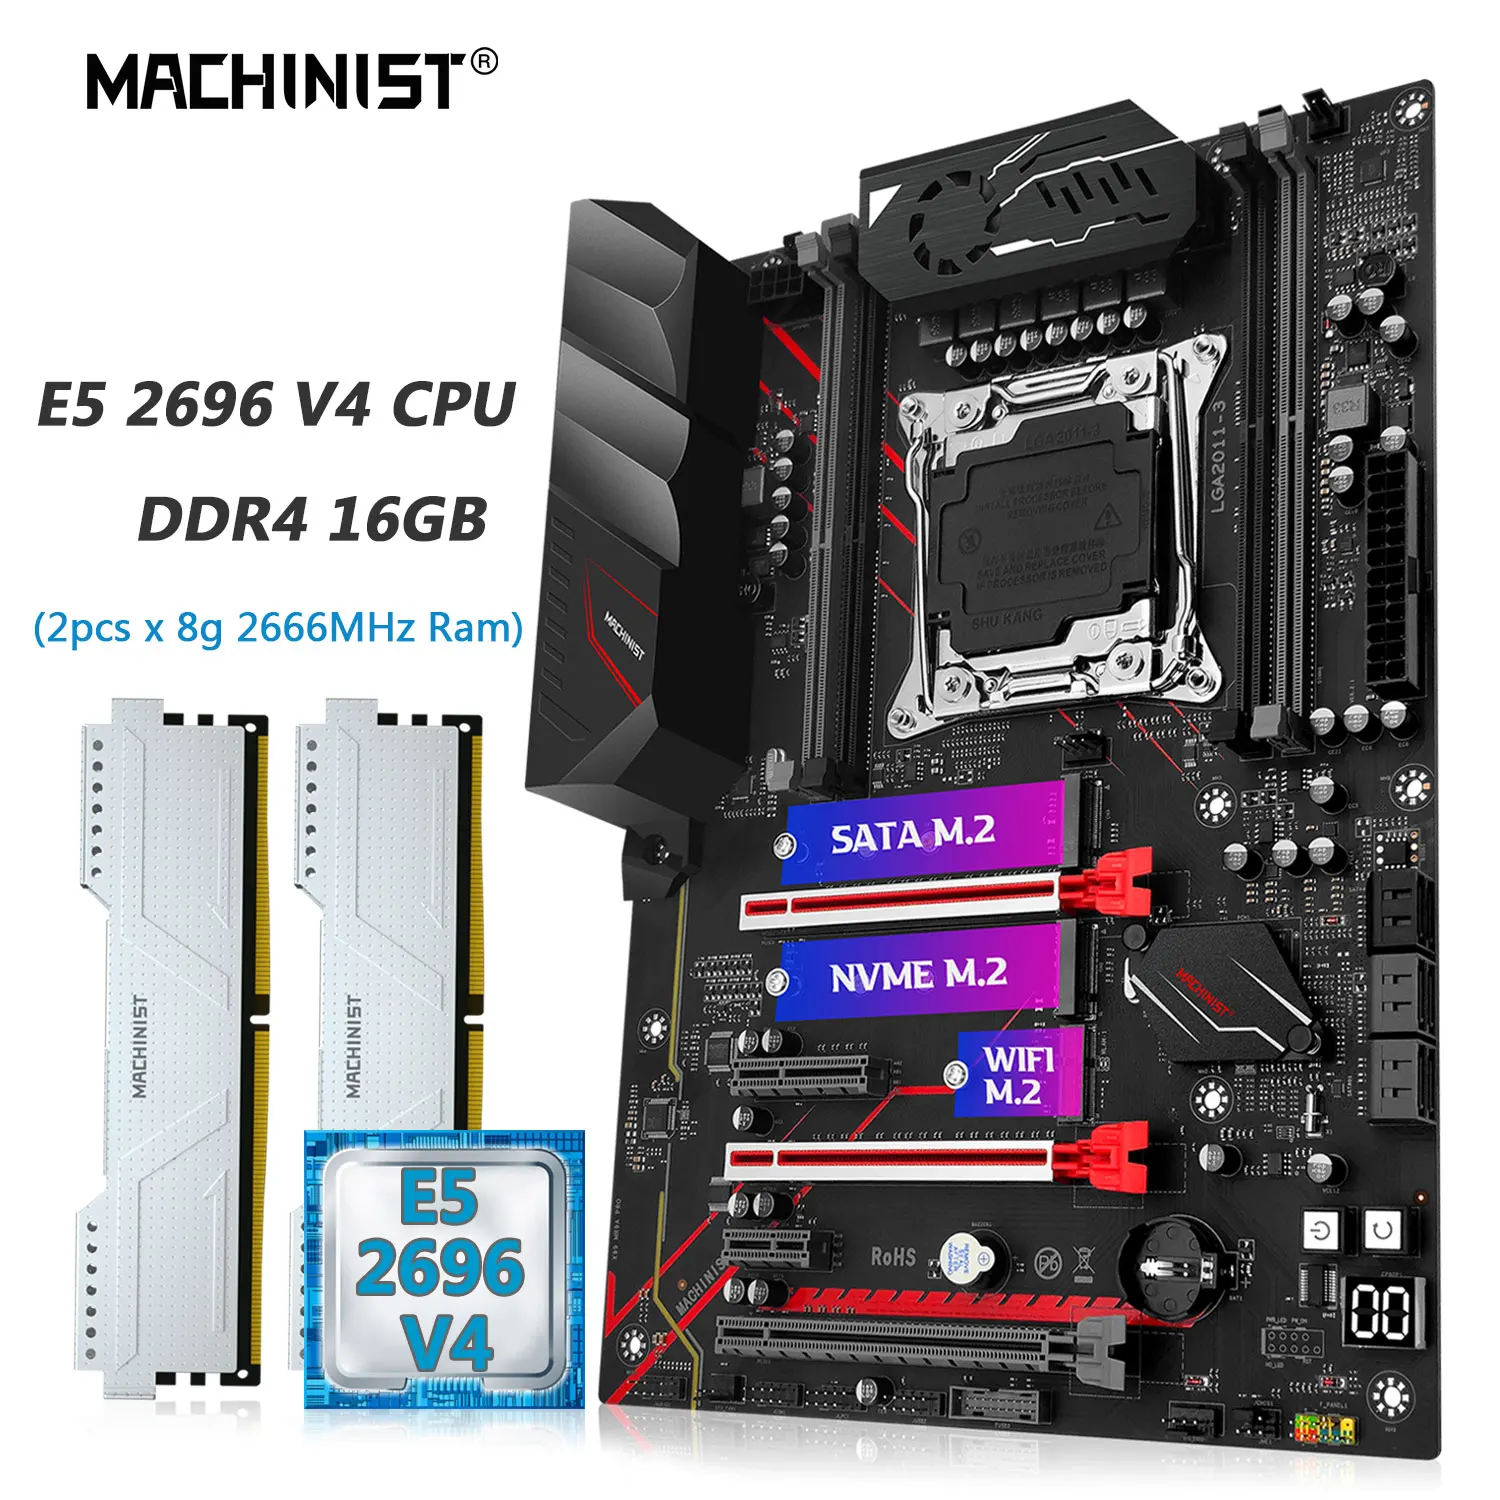 

MACHINIST X99 Motherboard Combo Xeon E5 2696 V4 CPU Kit LAG 2011-3 DDR4 2*8G=16GB 2666MHz RAM Four Channel NVME M.2 MR9A PRO MAX